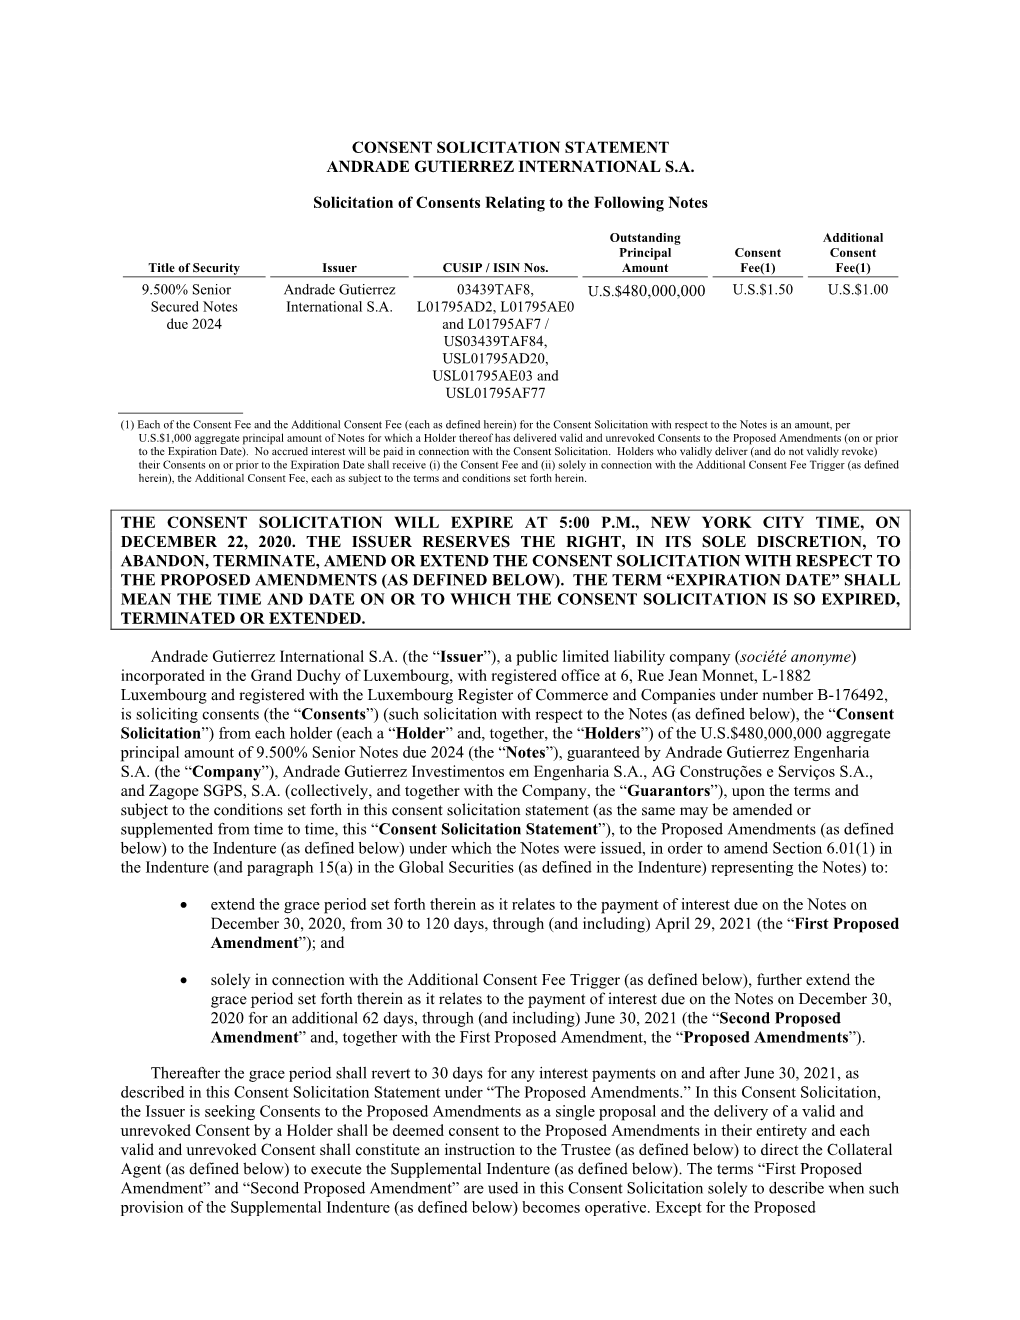 CONSENT SOLICITATION STATEMENT ANDRADE GUTIERREZ INTERNATIONAL S.A. Solicitation of Consents Relating to the Following Notes